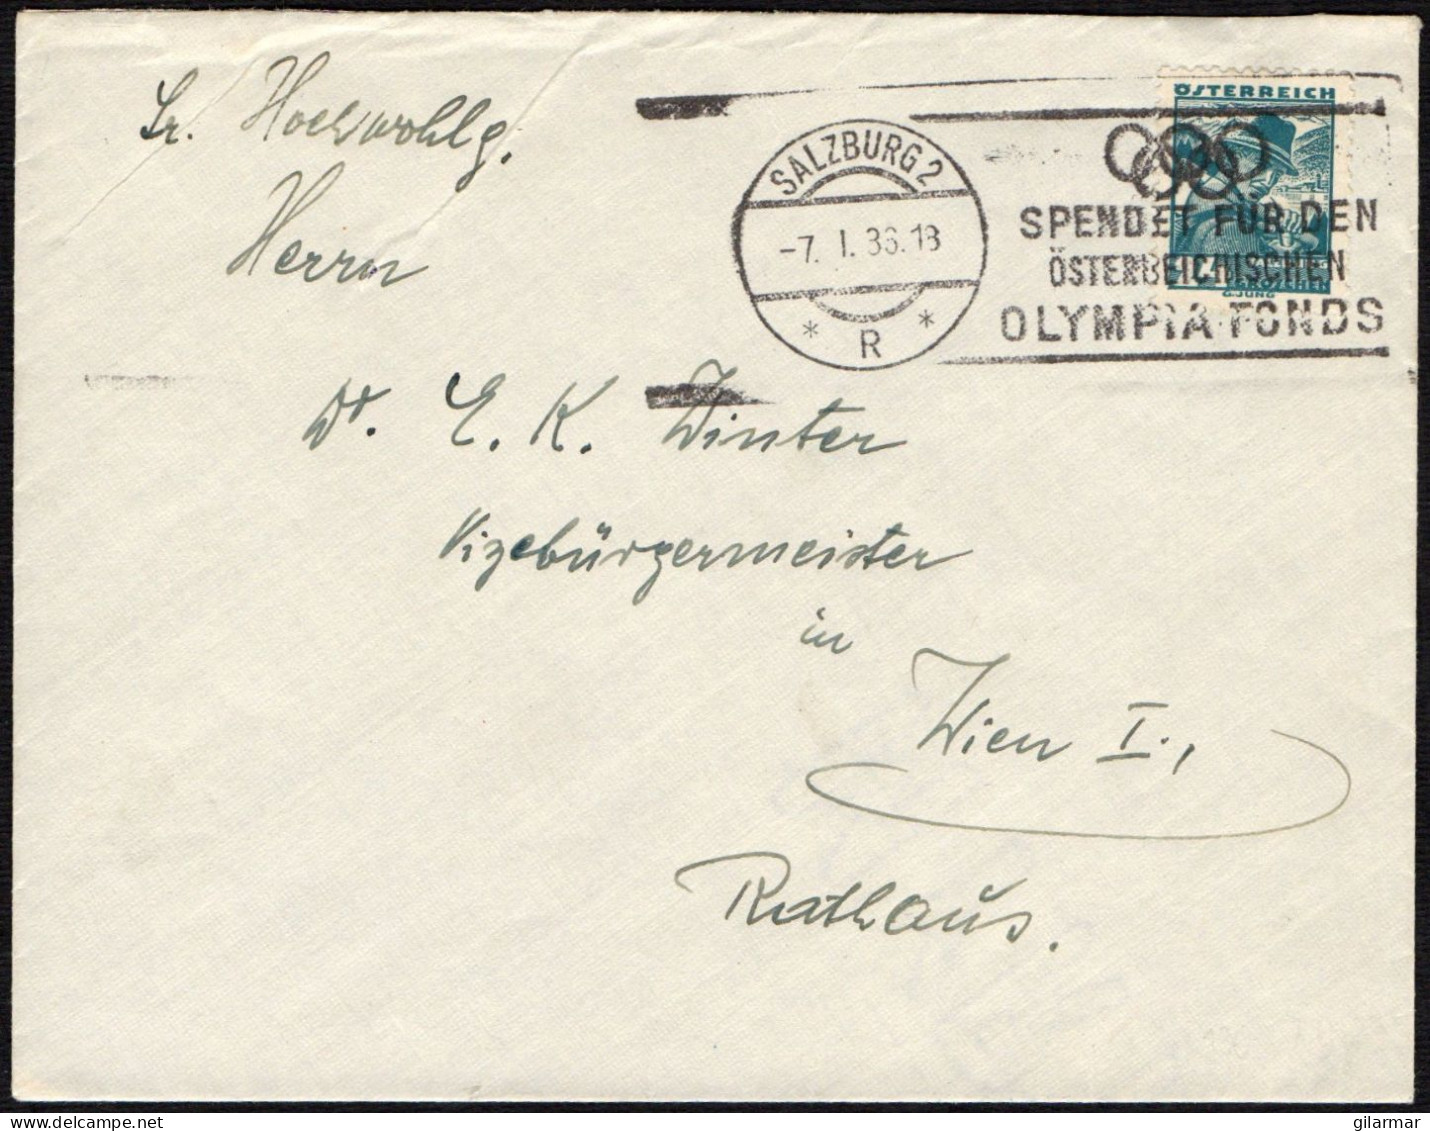 OLYMPIC GAMES 1936 - AUSTRIA SALZBURG 1936 - DONATE TO THE AUSTRIAN OLYMPIC FUND - MAILED ENVELOPE - M - Sommer 1936: Berlin